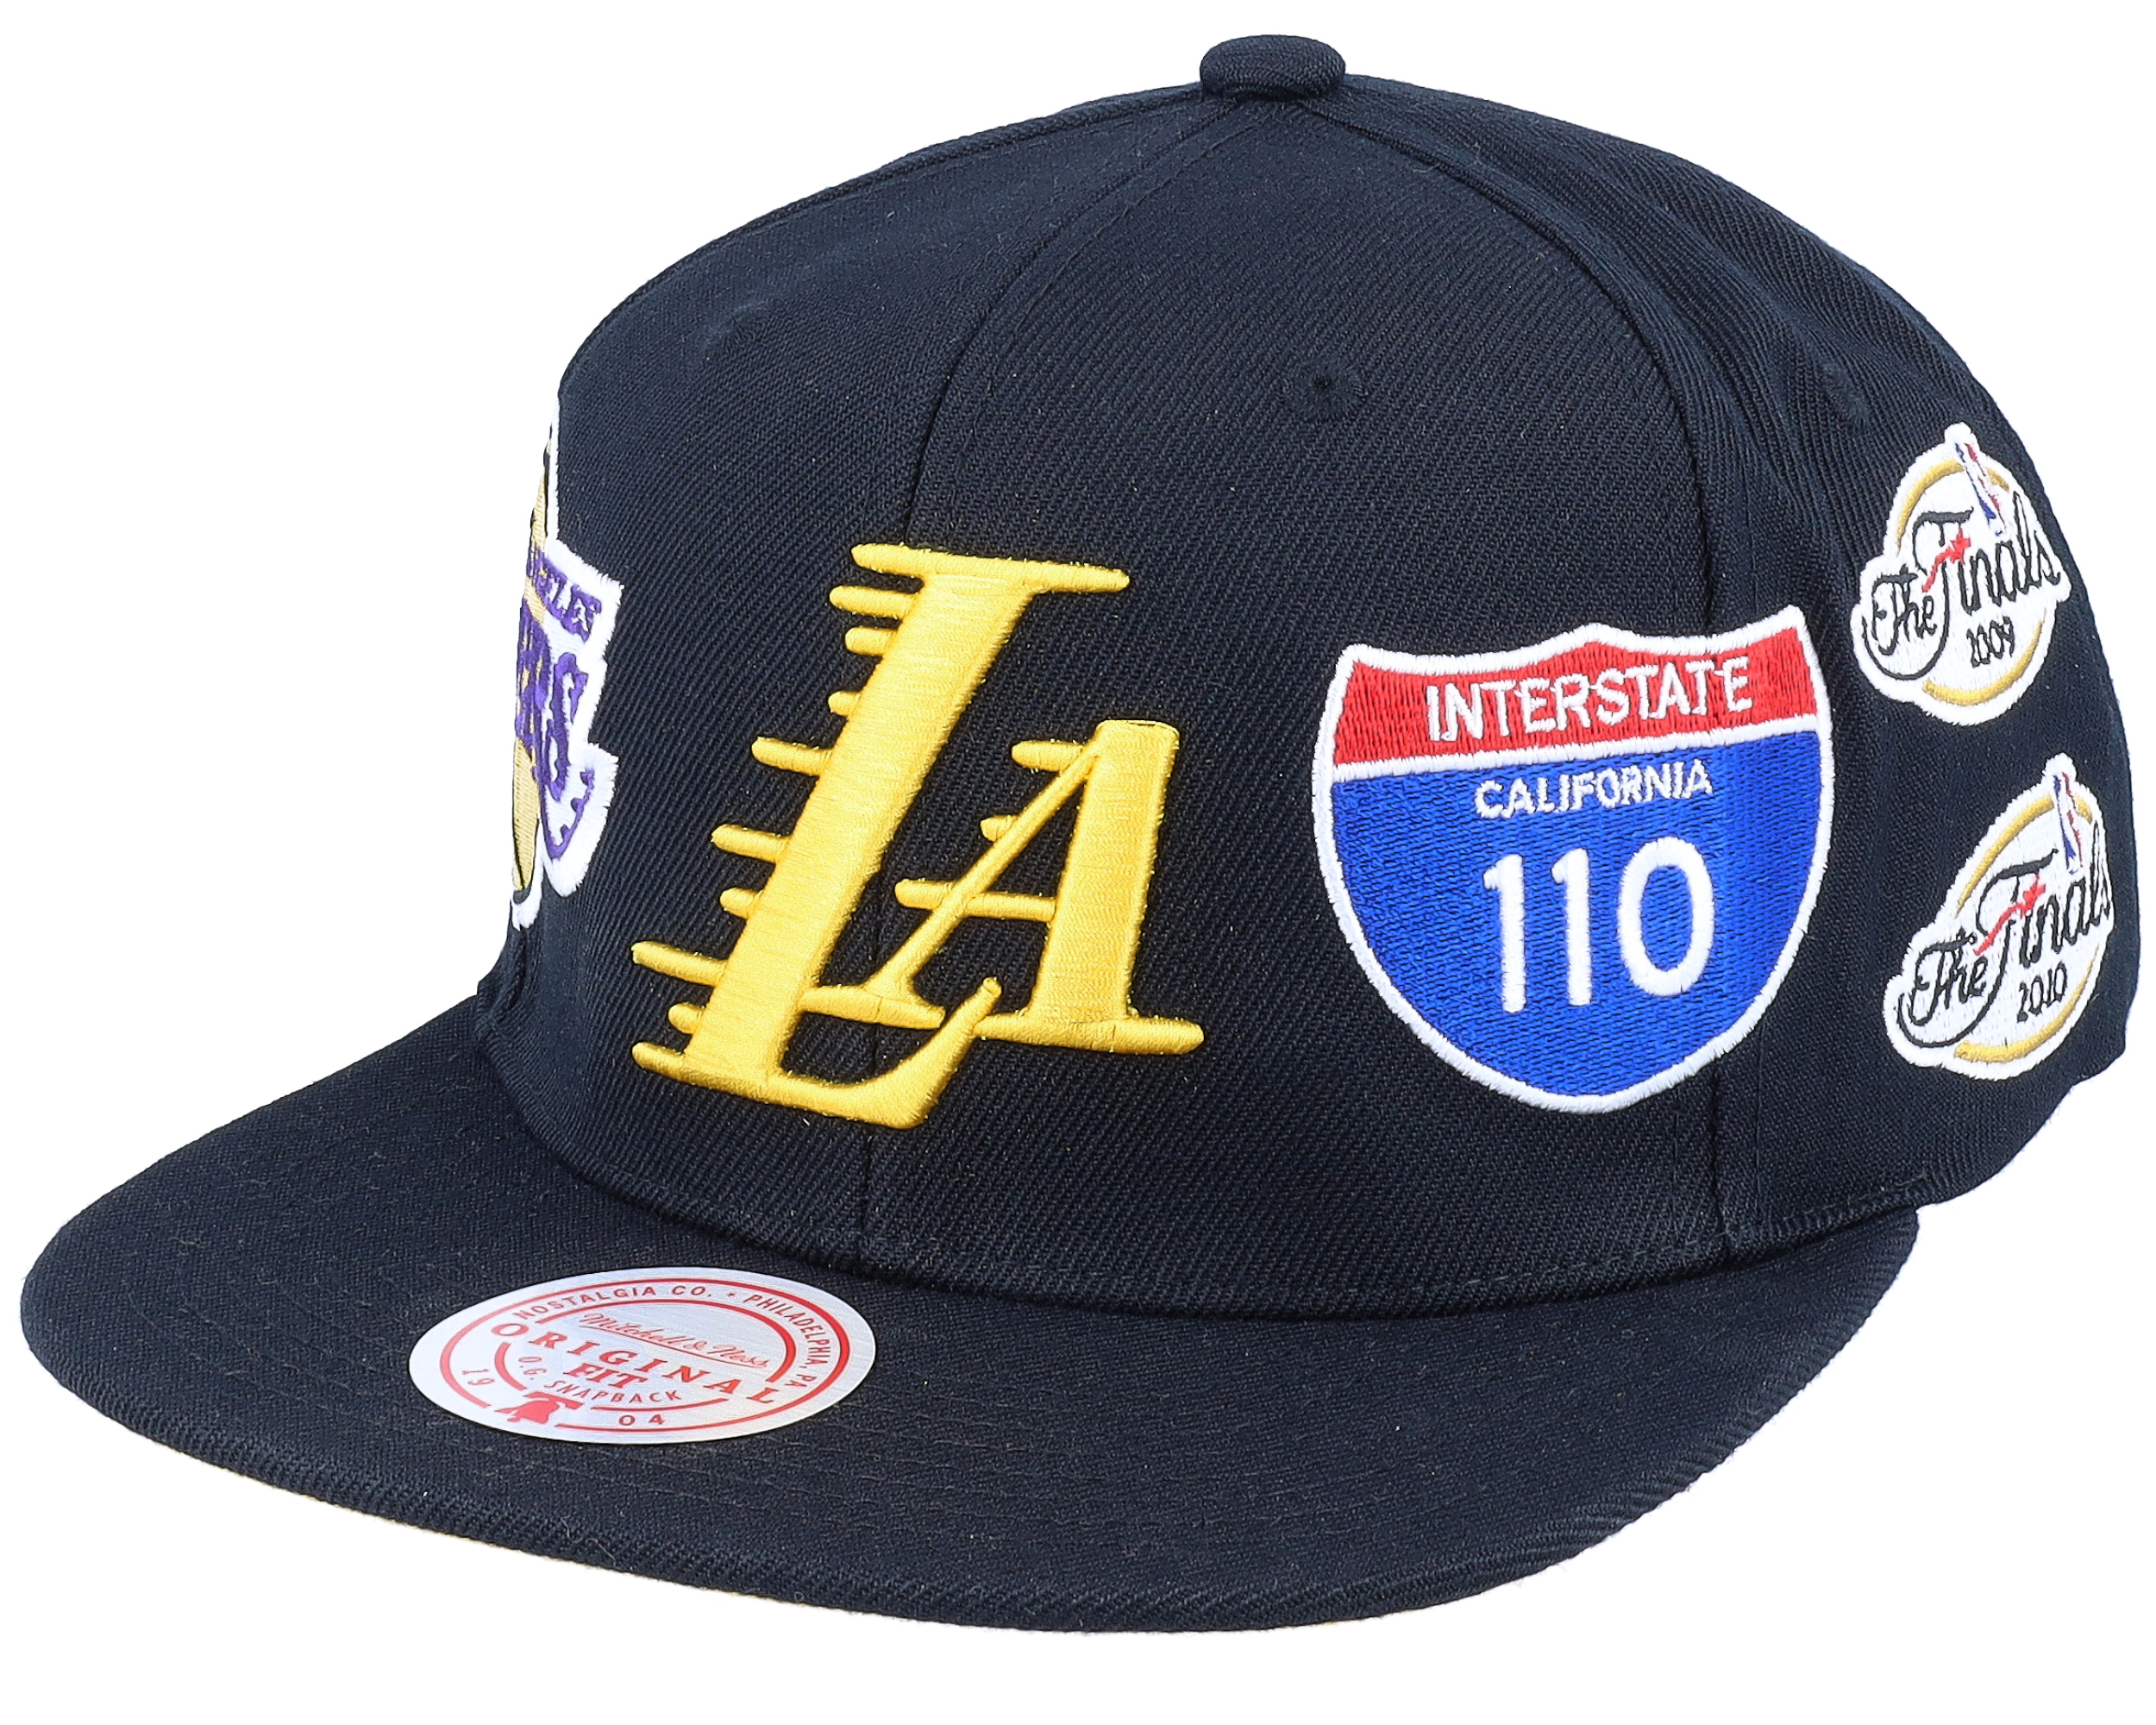 Mitchell and Ness Los Angeles Lakers Champ Patch Snapback Hat Black